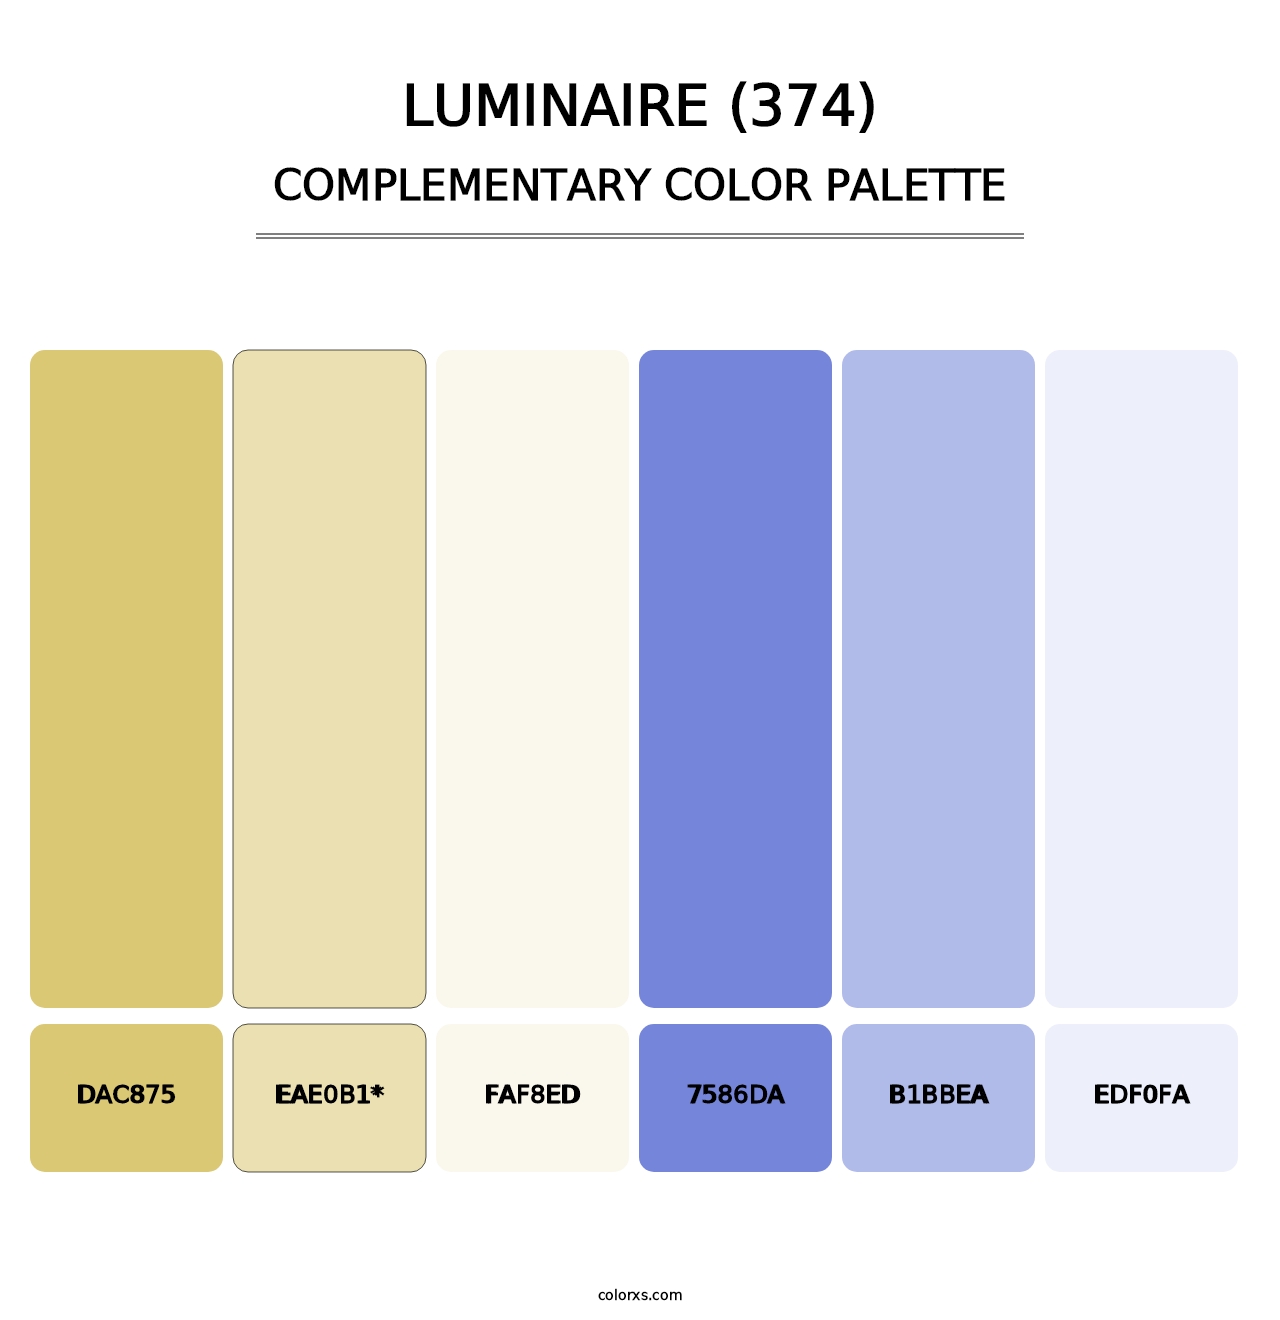 Luminaire (374) - Complementary Color Palette